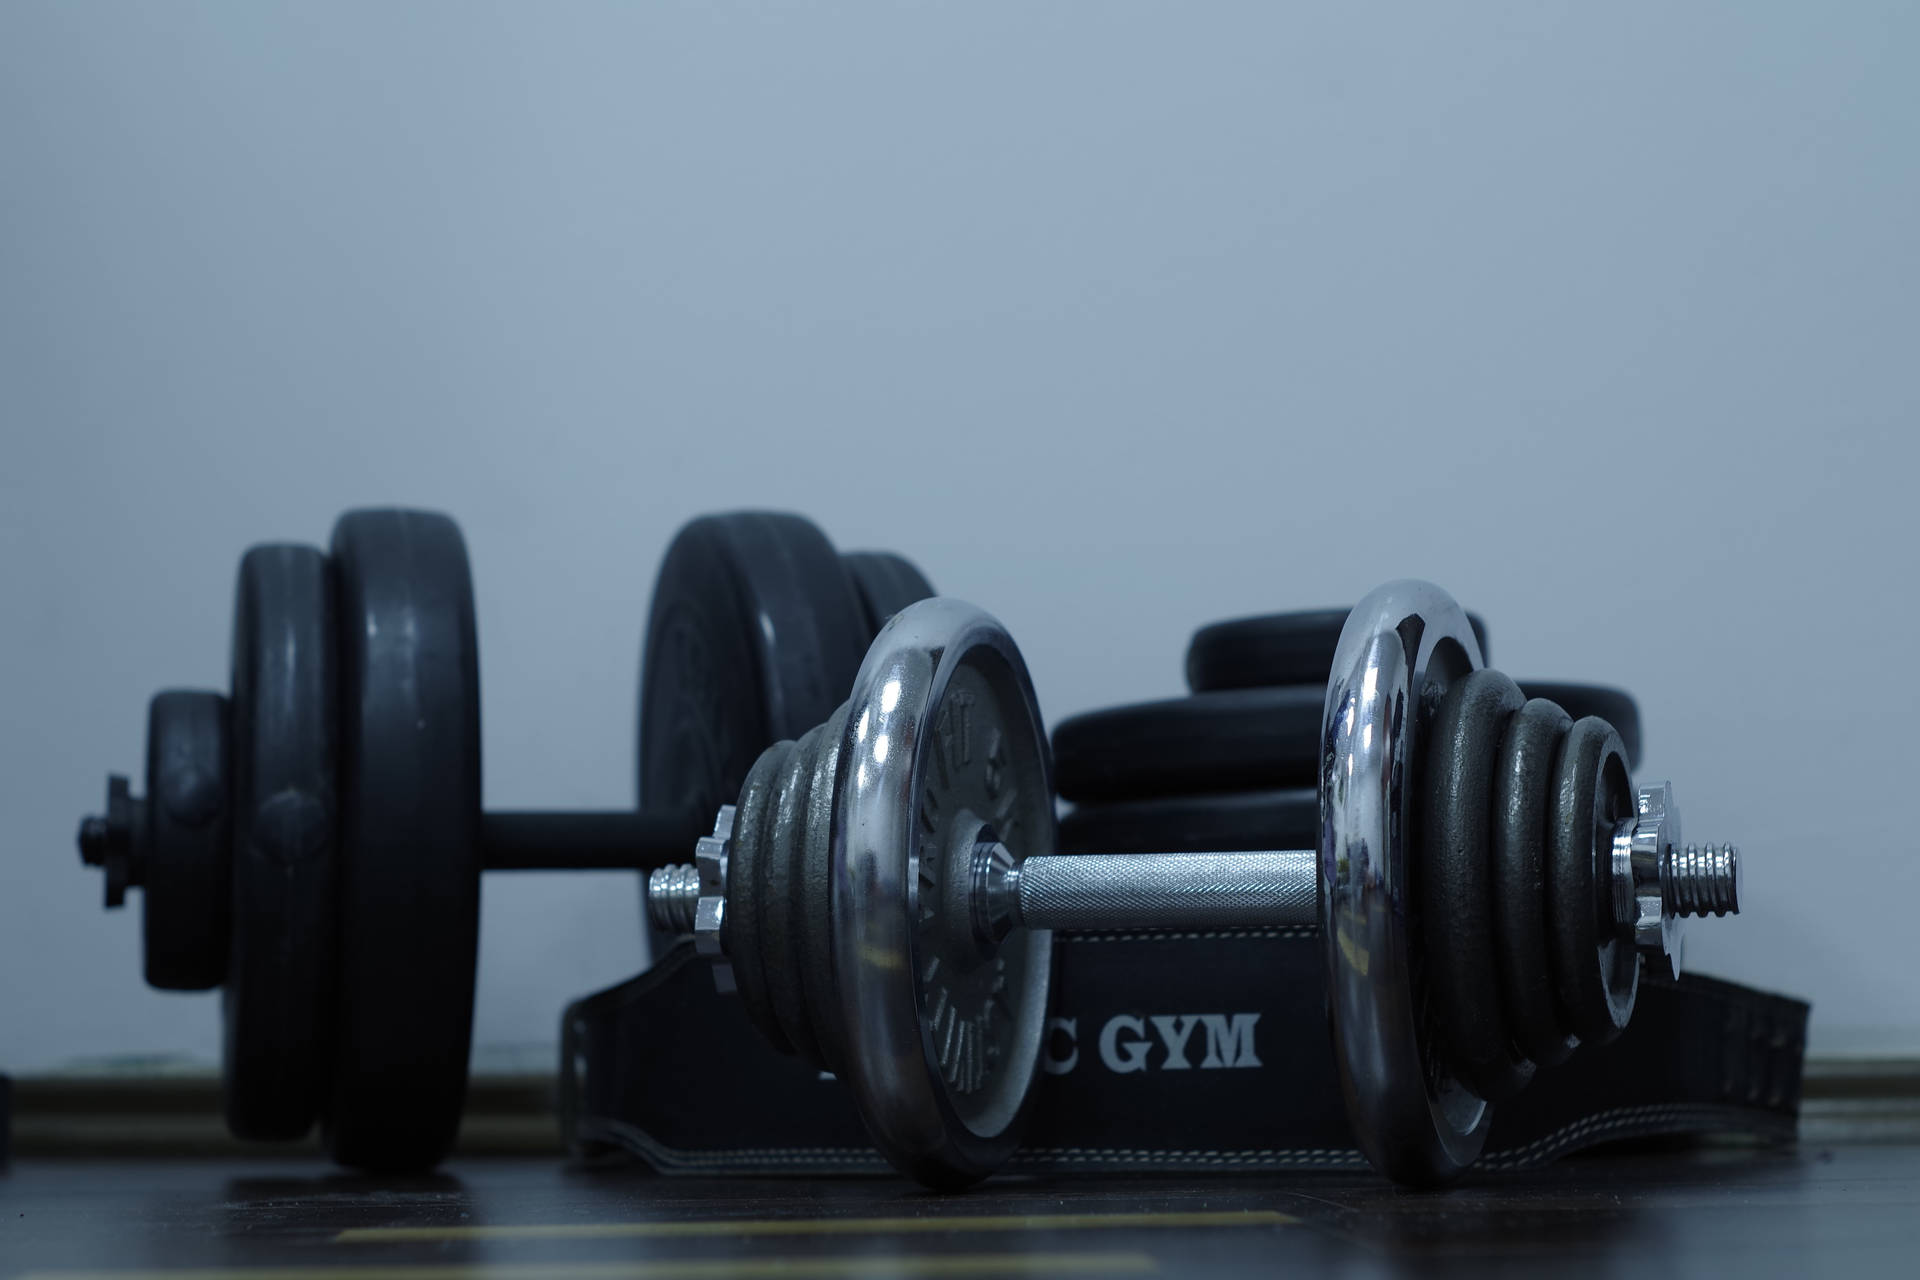 Gym 5472X3648 Wallpaper and Background Image